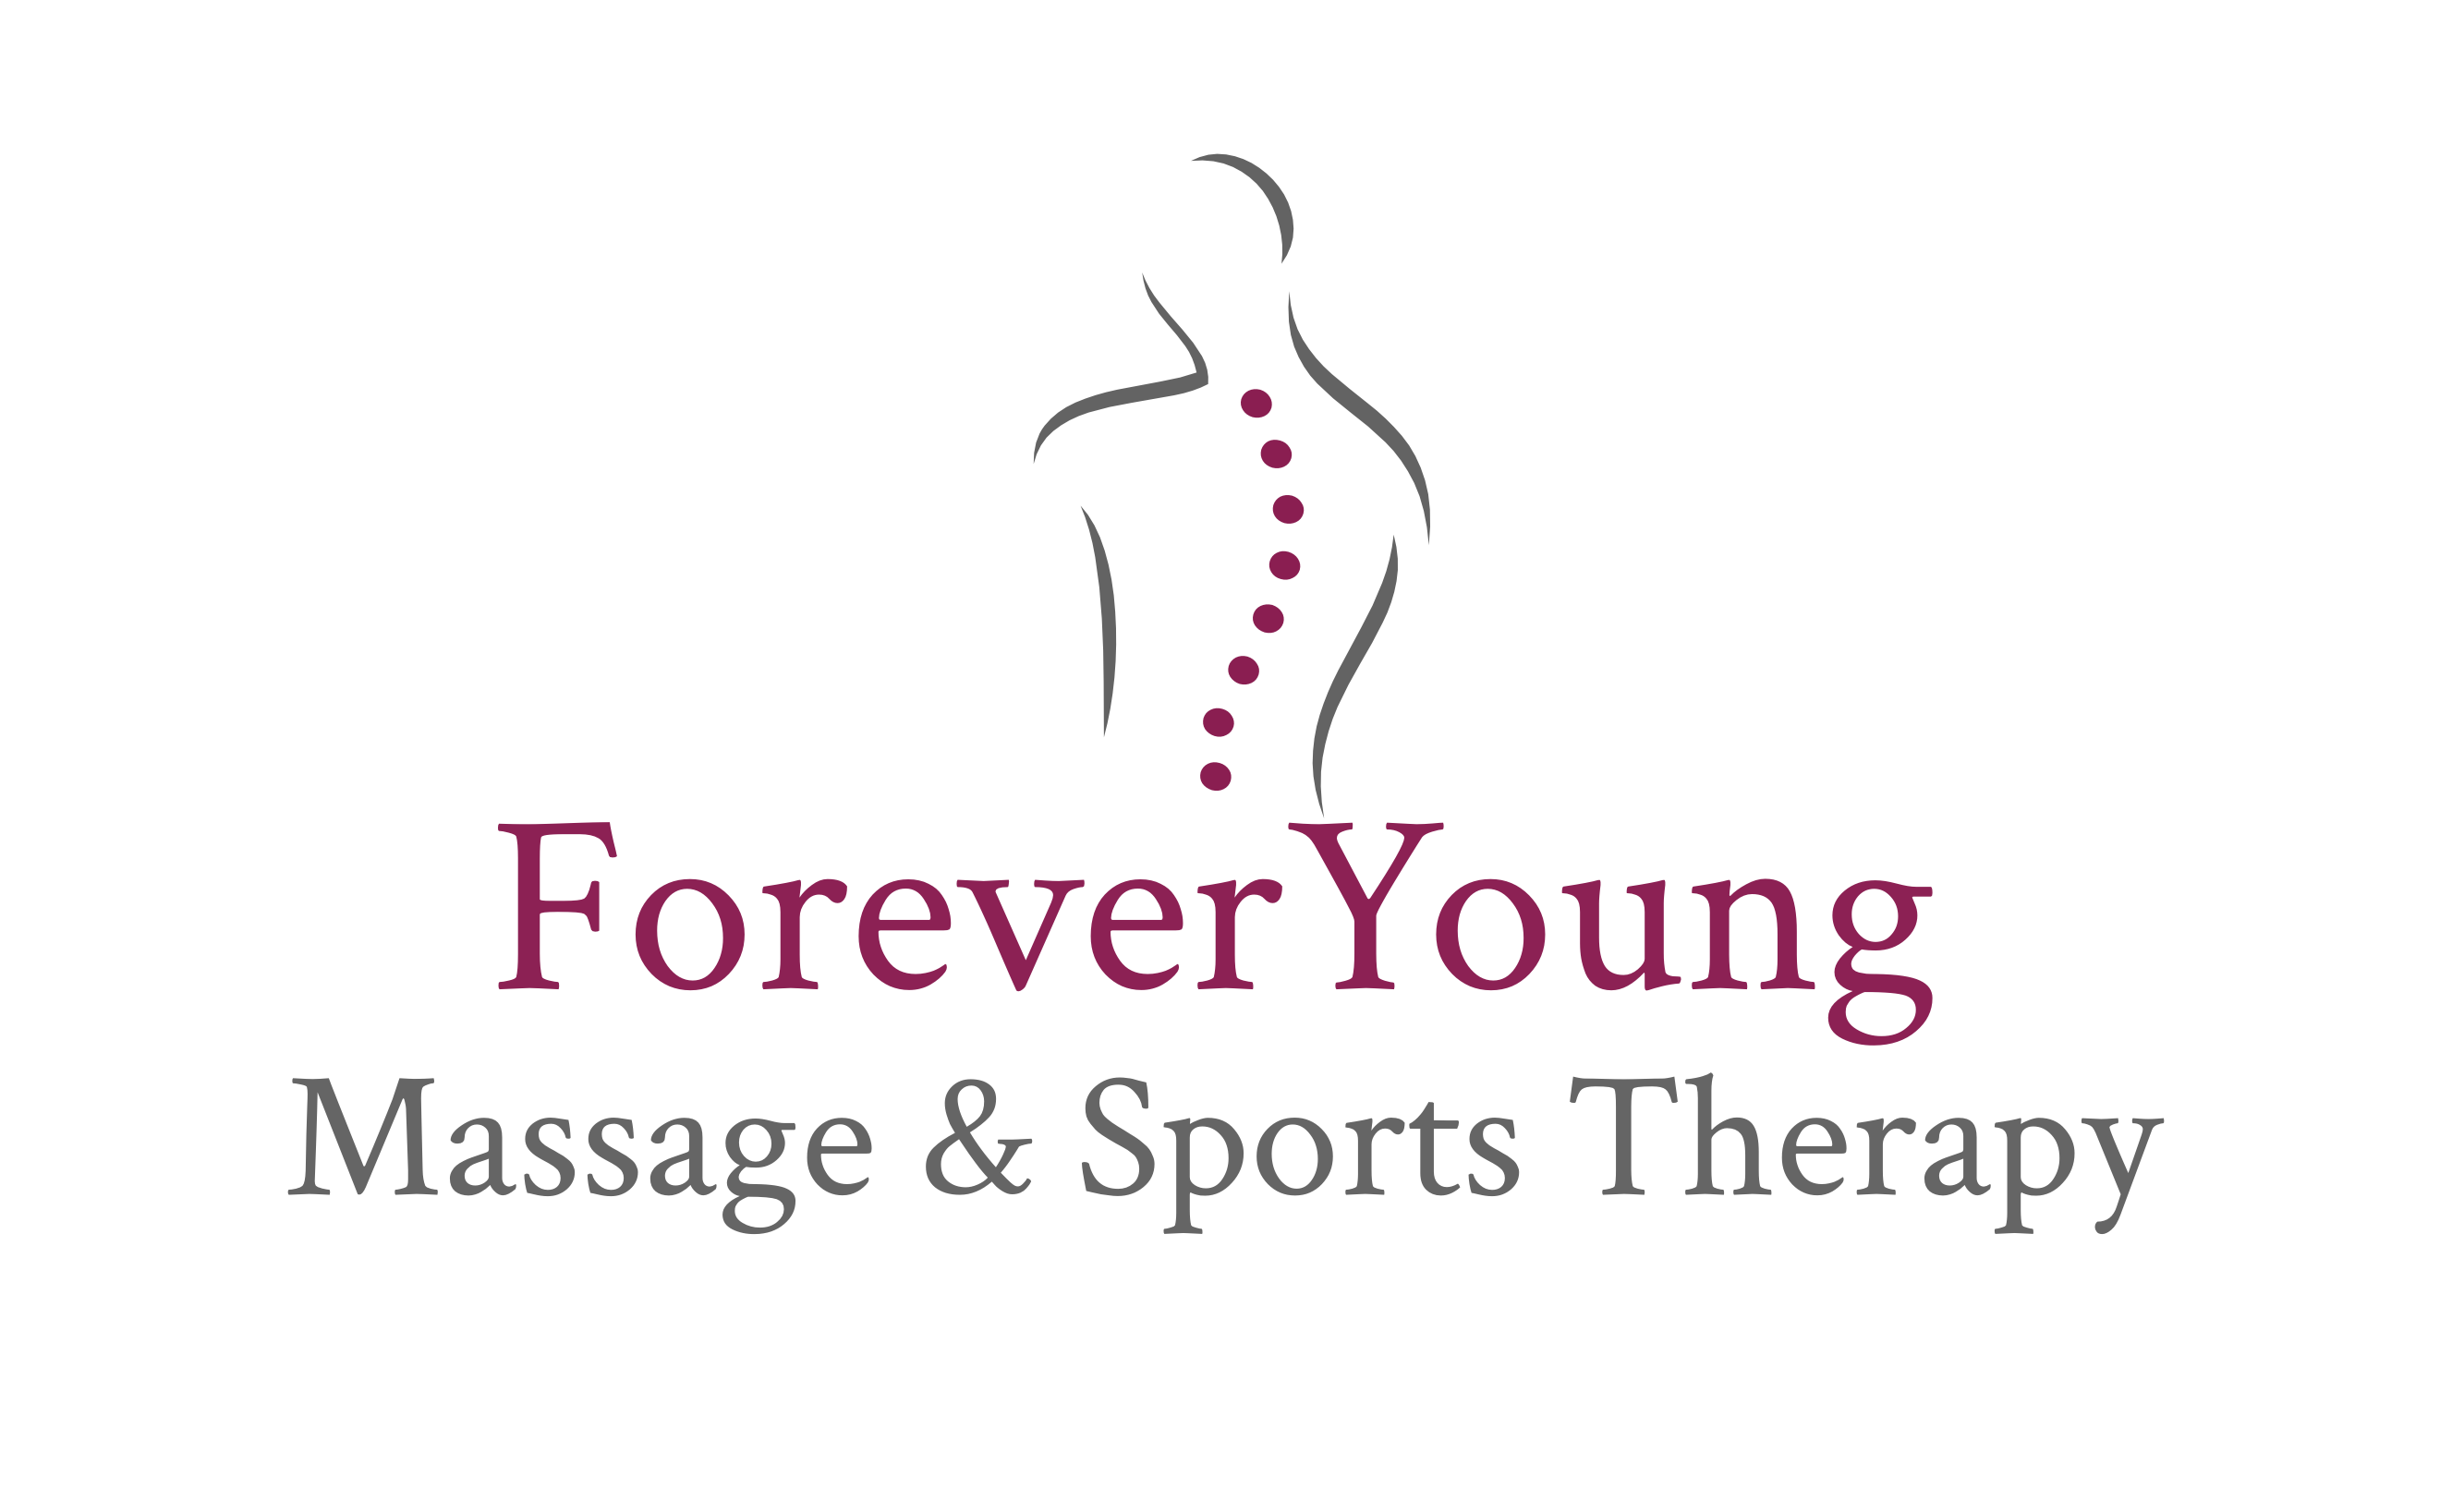 Forever Young Massage